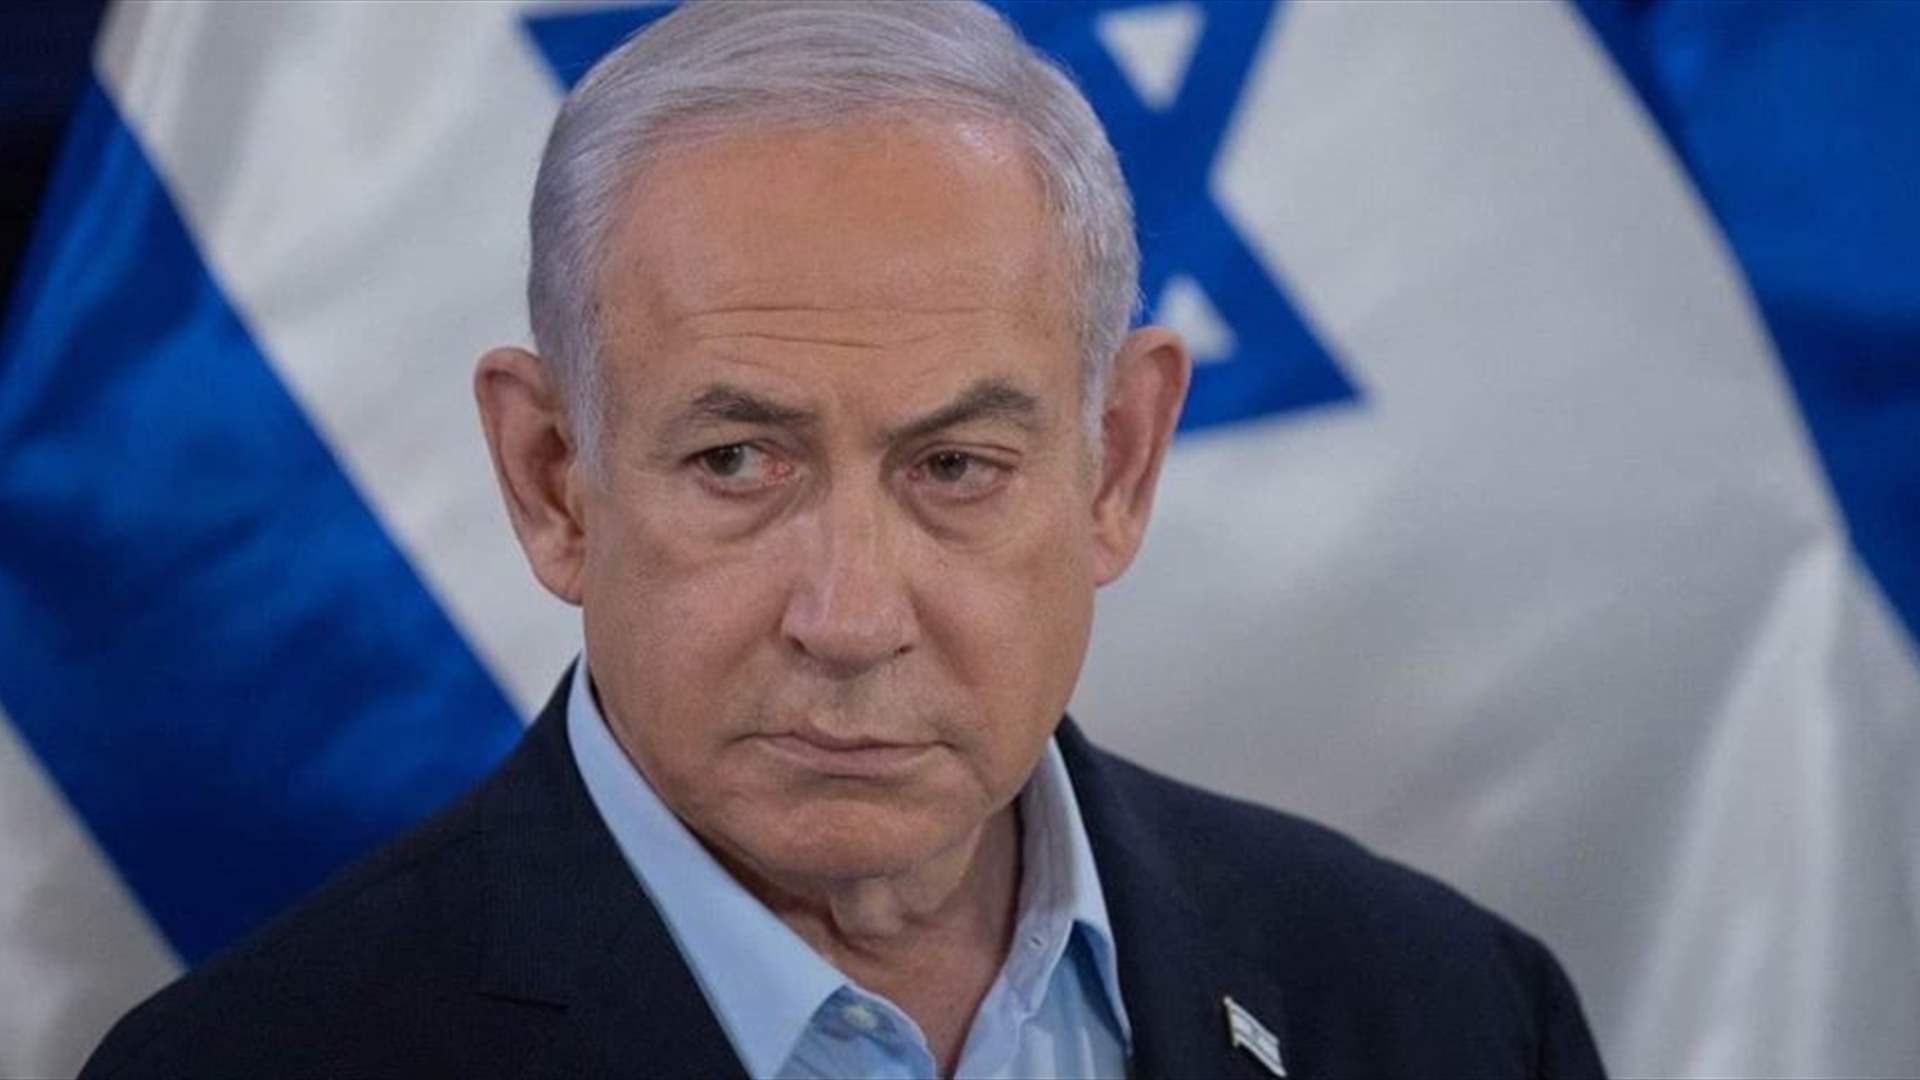 Netanyahu Rejects Granting Palestinians Sovereignty Over Gaza in Call with Biden